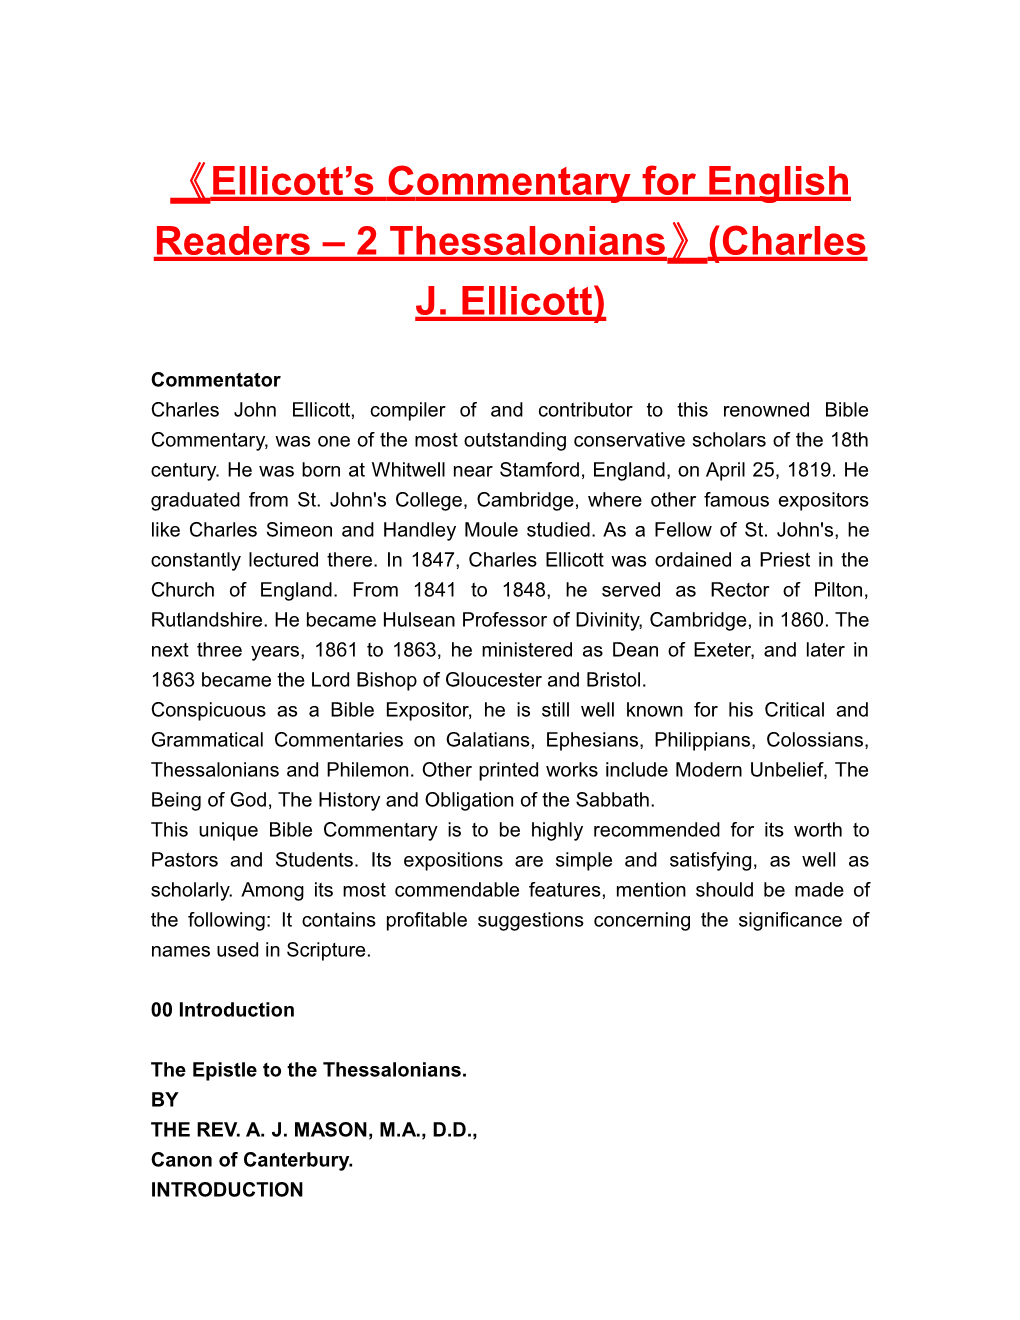 Ellicott S Commentary for English Readers 2 Thessalonians (Charles J. Ellicott)